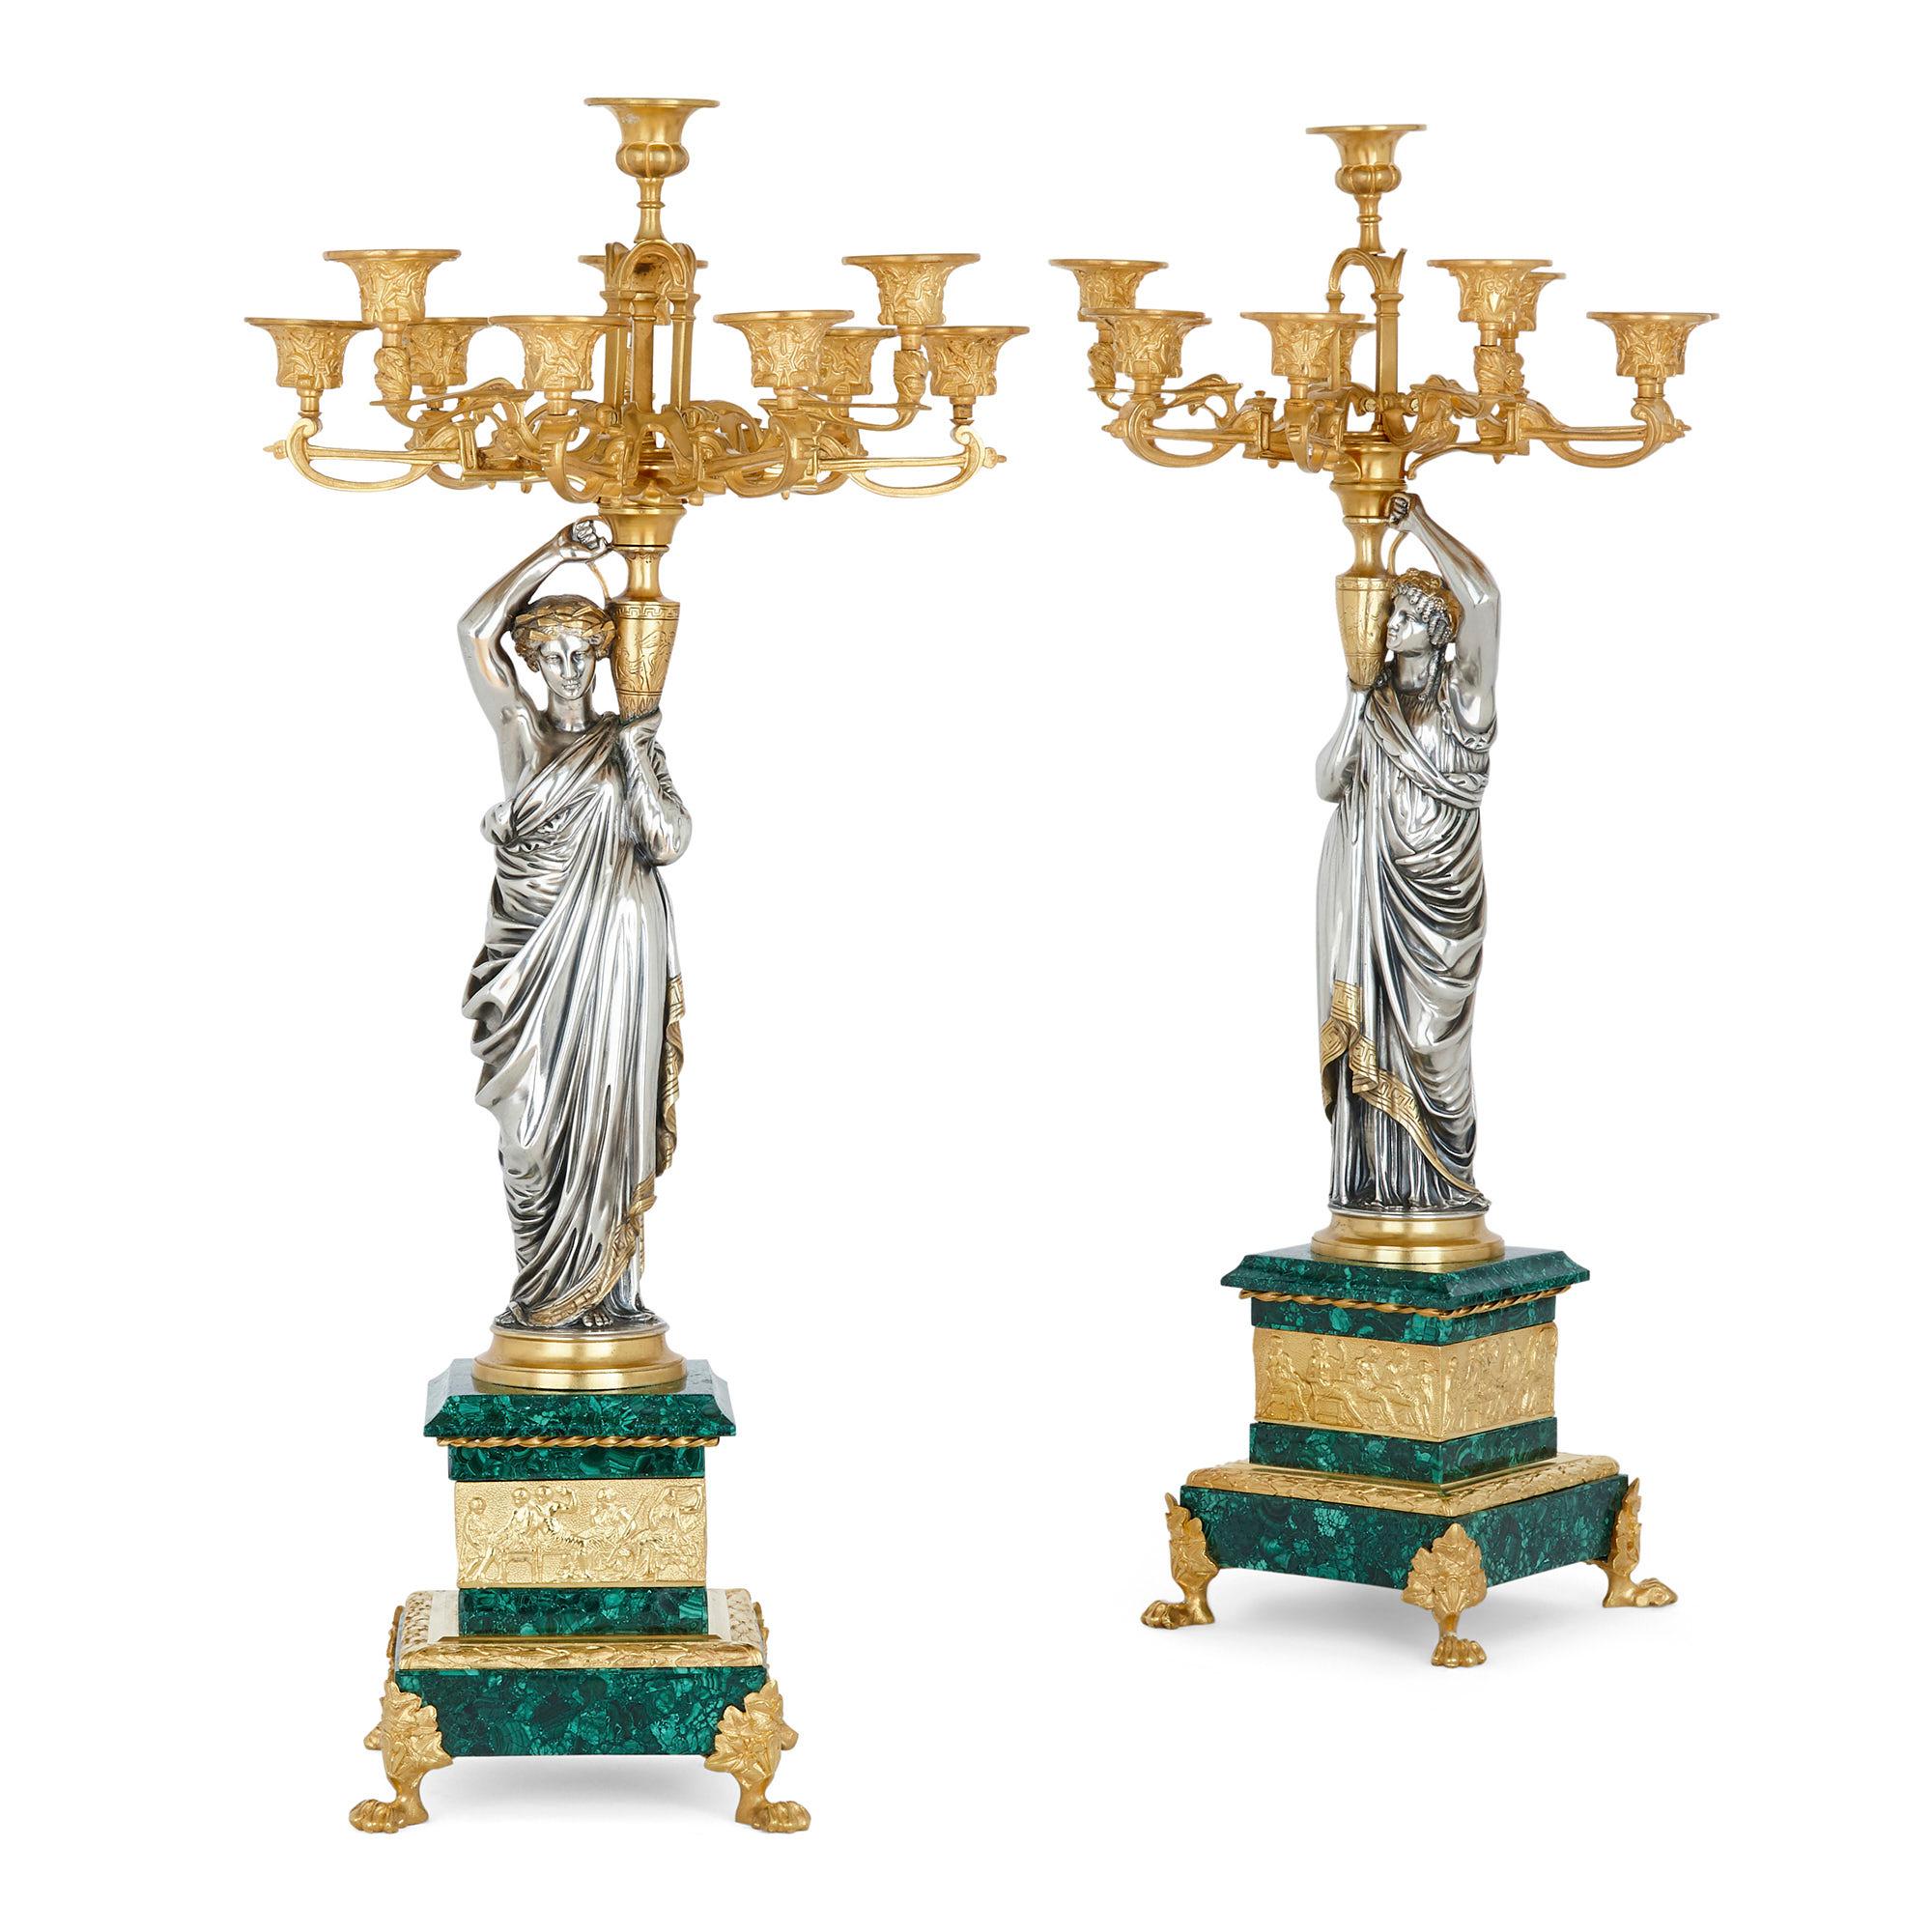 French Ormolu and Silvered Bronze Mounted Malachite Three-Piece Clock Set For Sale 3